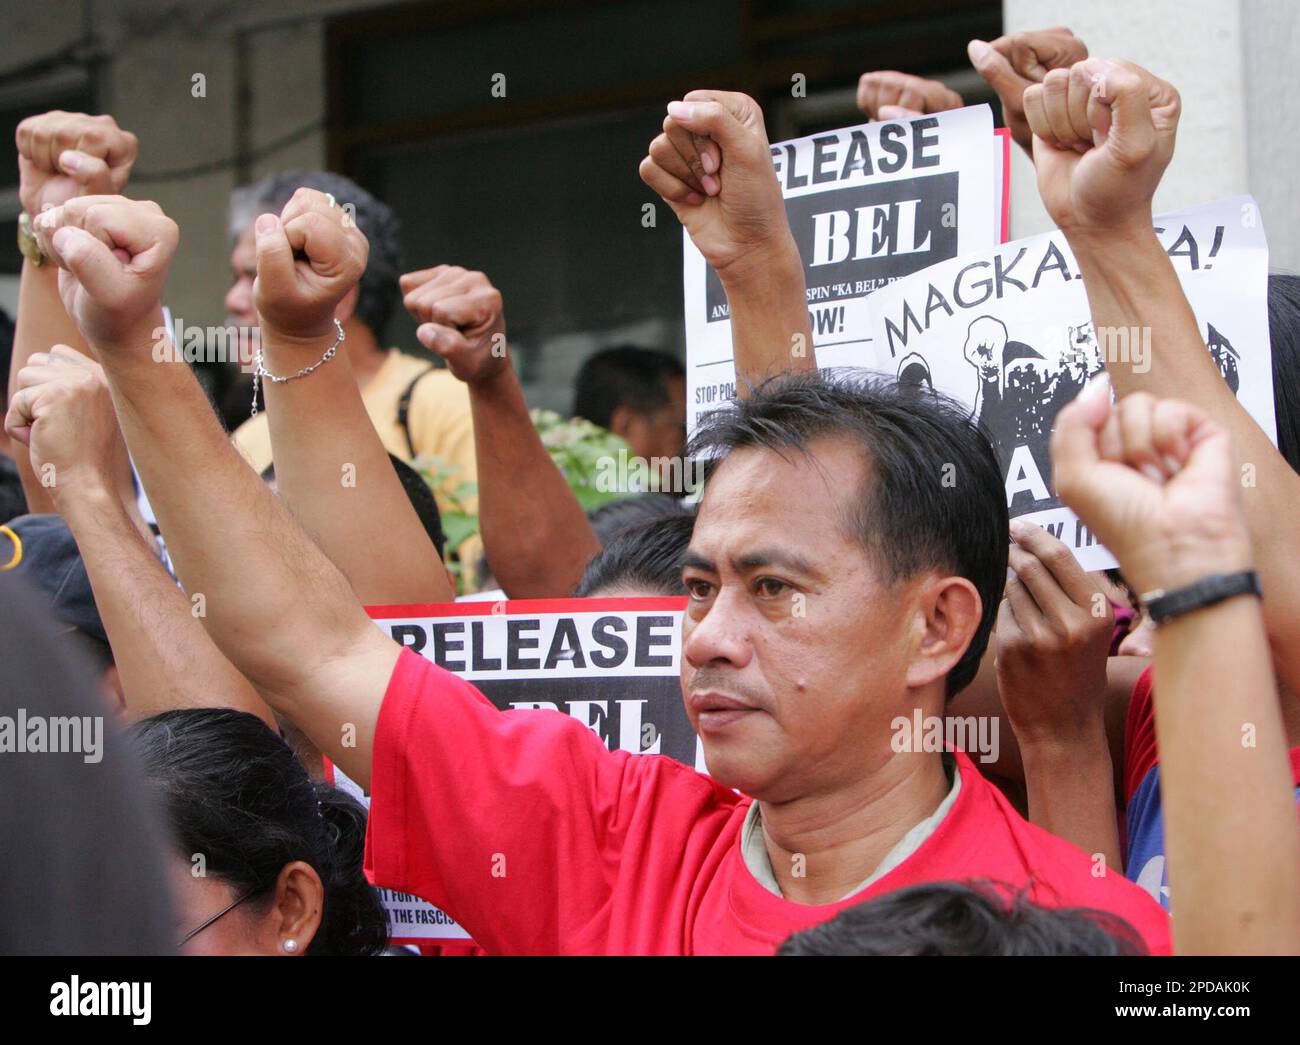 Leftist protesters raise their clenched fist as they call for the release of party-list Congressman Crispin Beltran Monday, March 6, 2006 at the trial court in Makati City south of Manila. Congressman Beltran was arrested without a warrant during the state of national democracy declared by President Gloria Macapagal Arroyo. (AP Photo/Pat Roque) Stock Photo